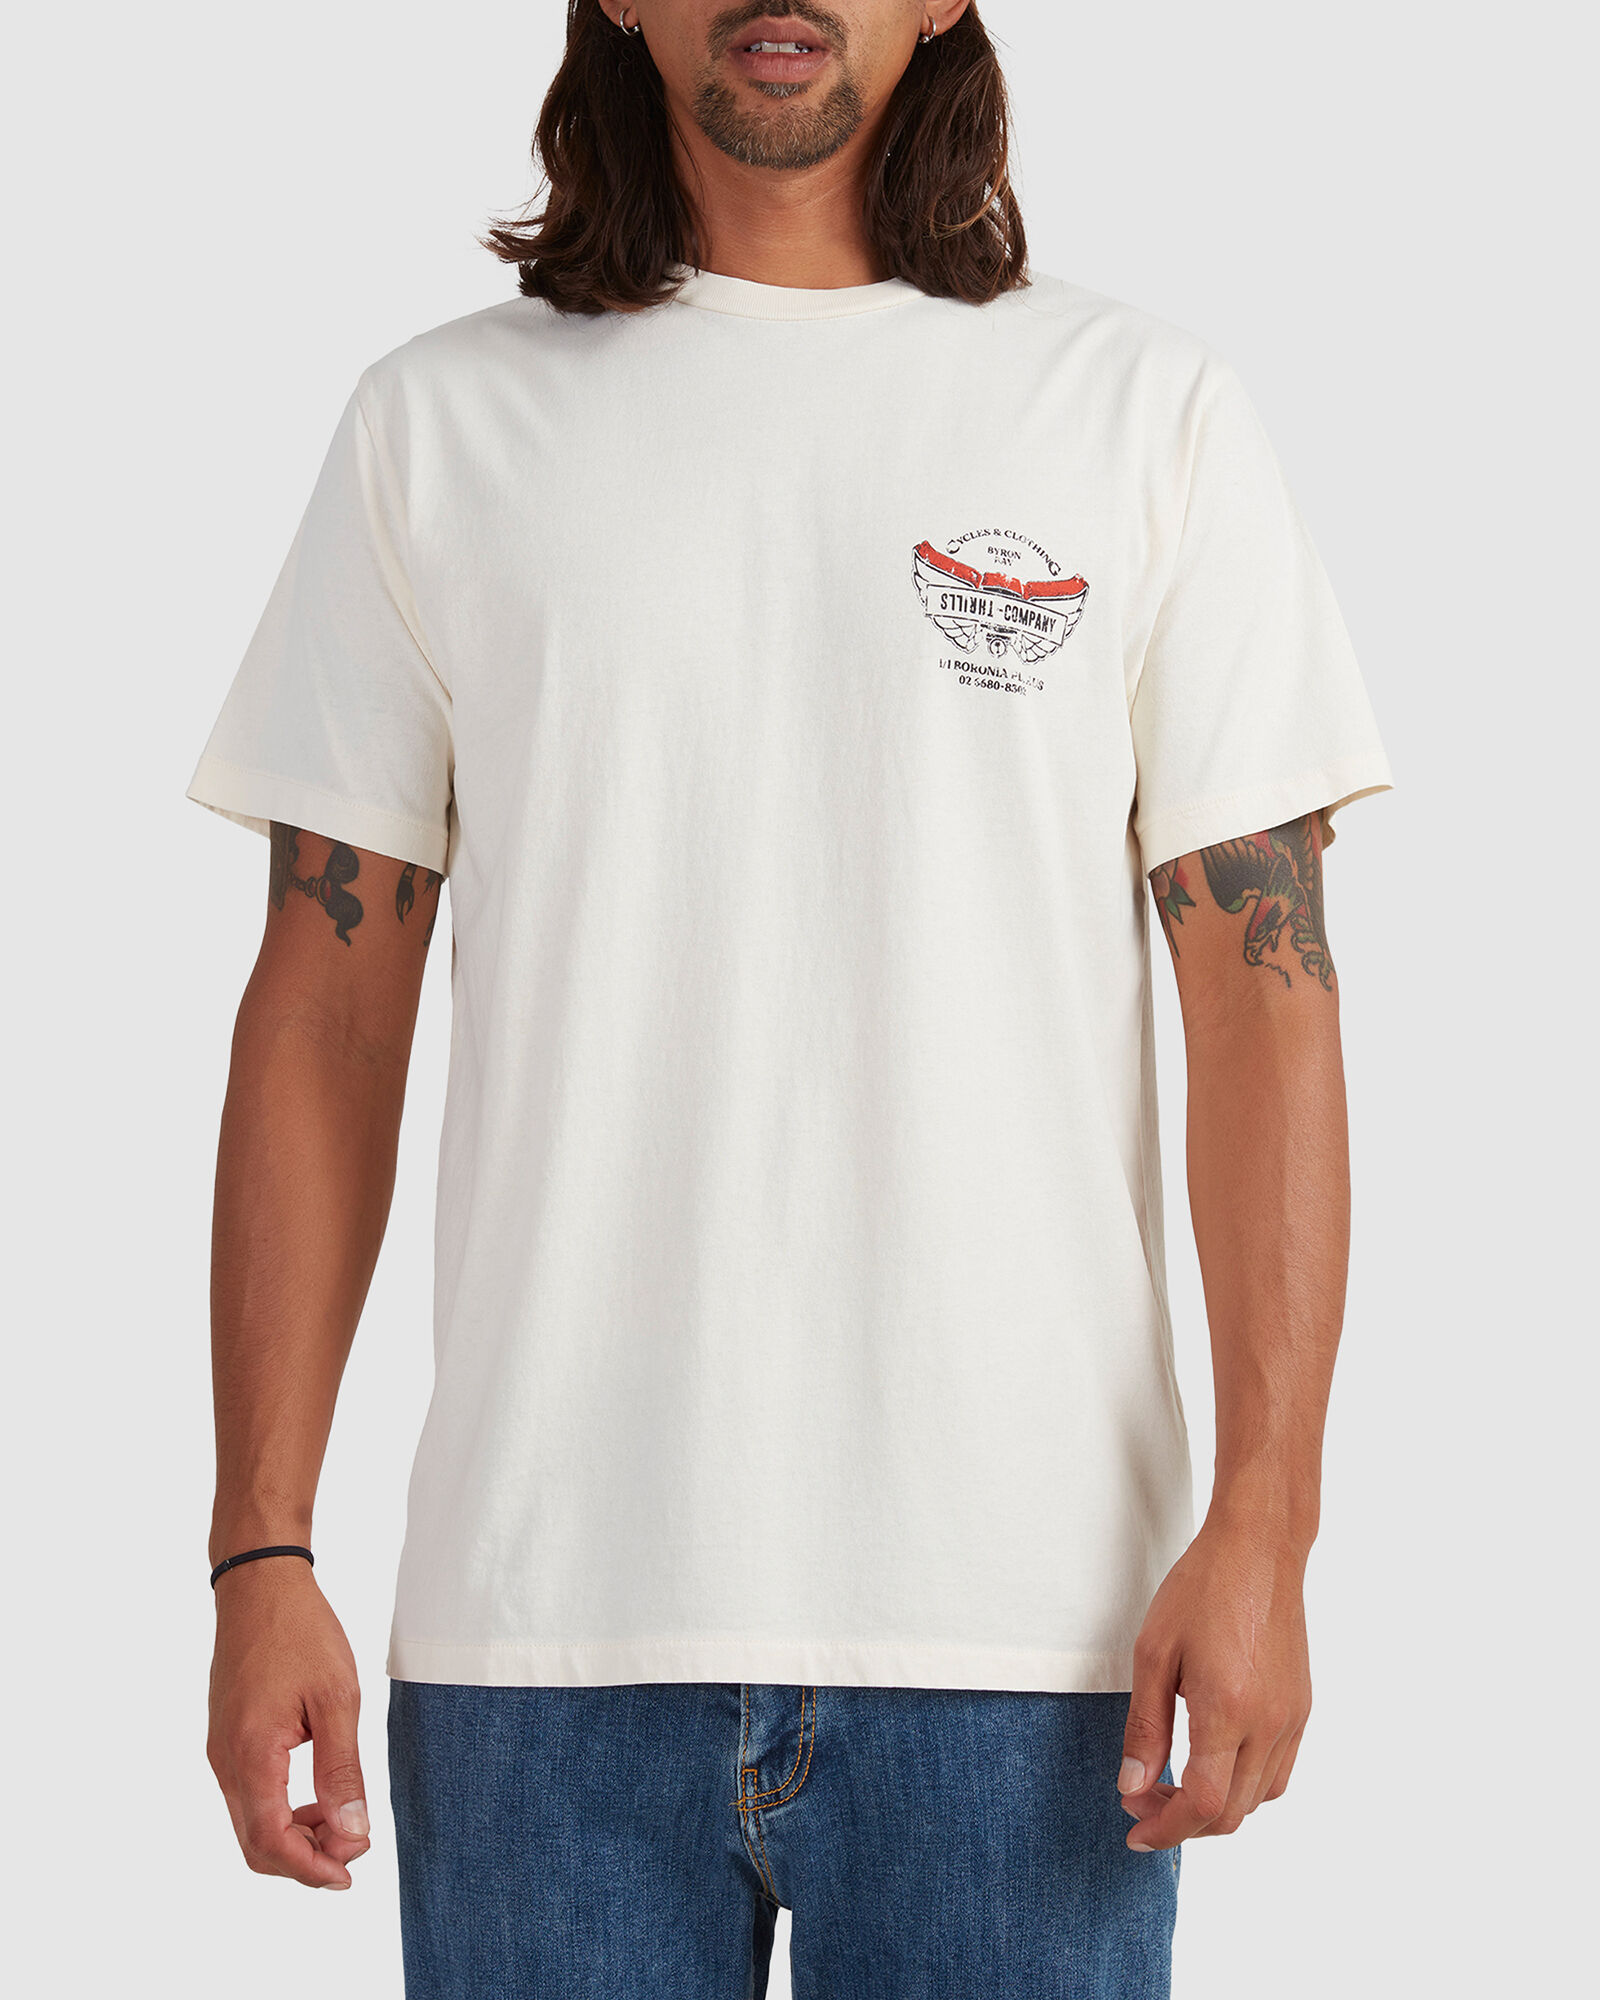 Mens C&c Wings Merch Fit Tee - Heritage White by THRILLS | Surf, Dive ...